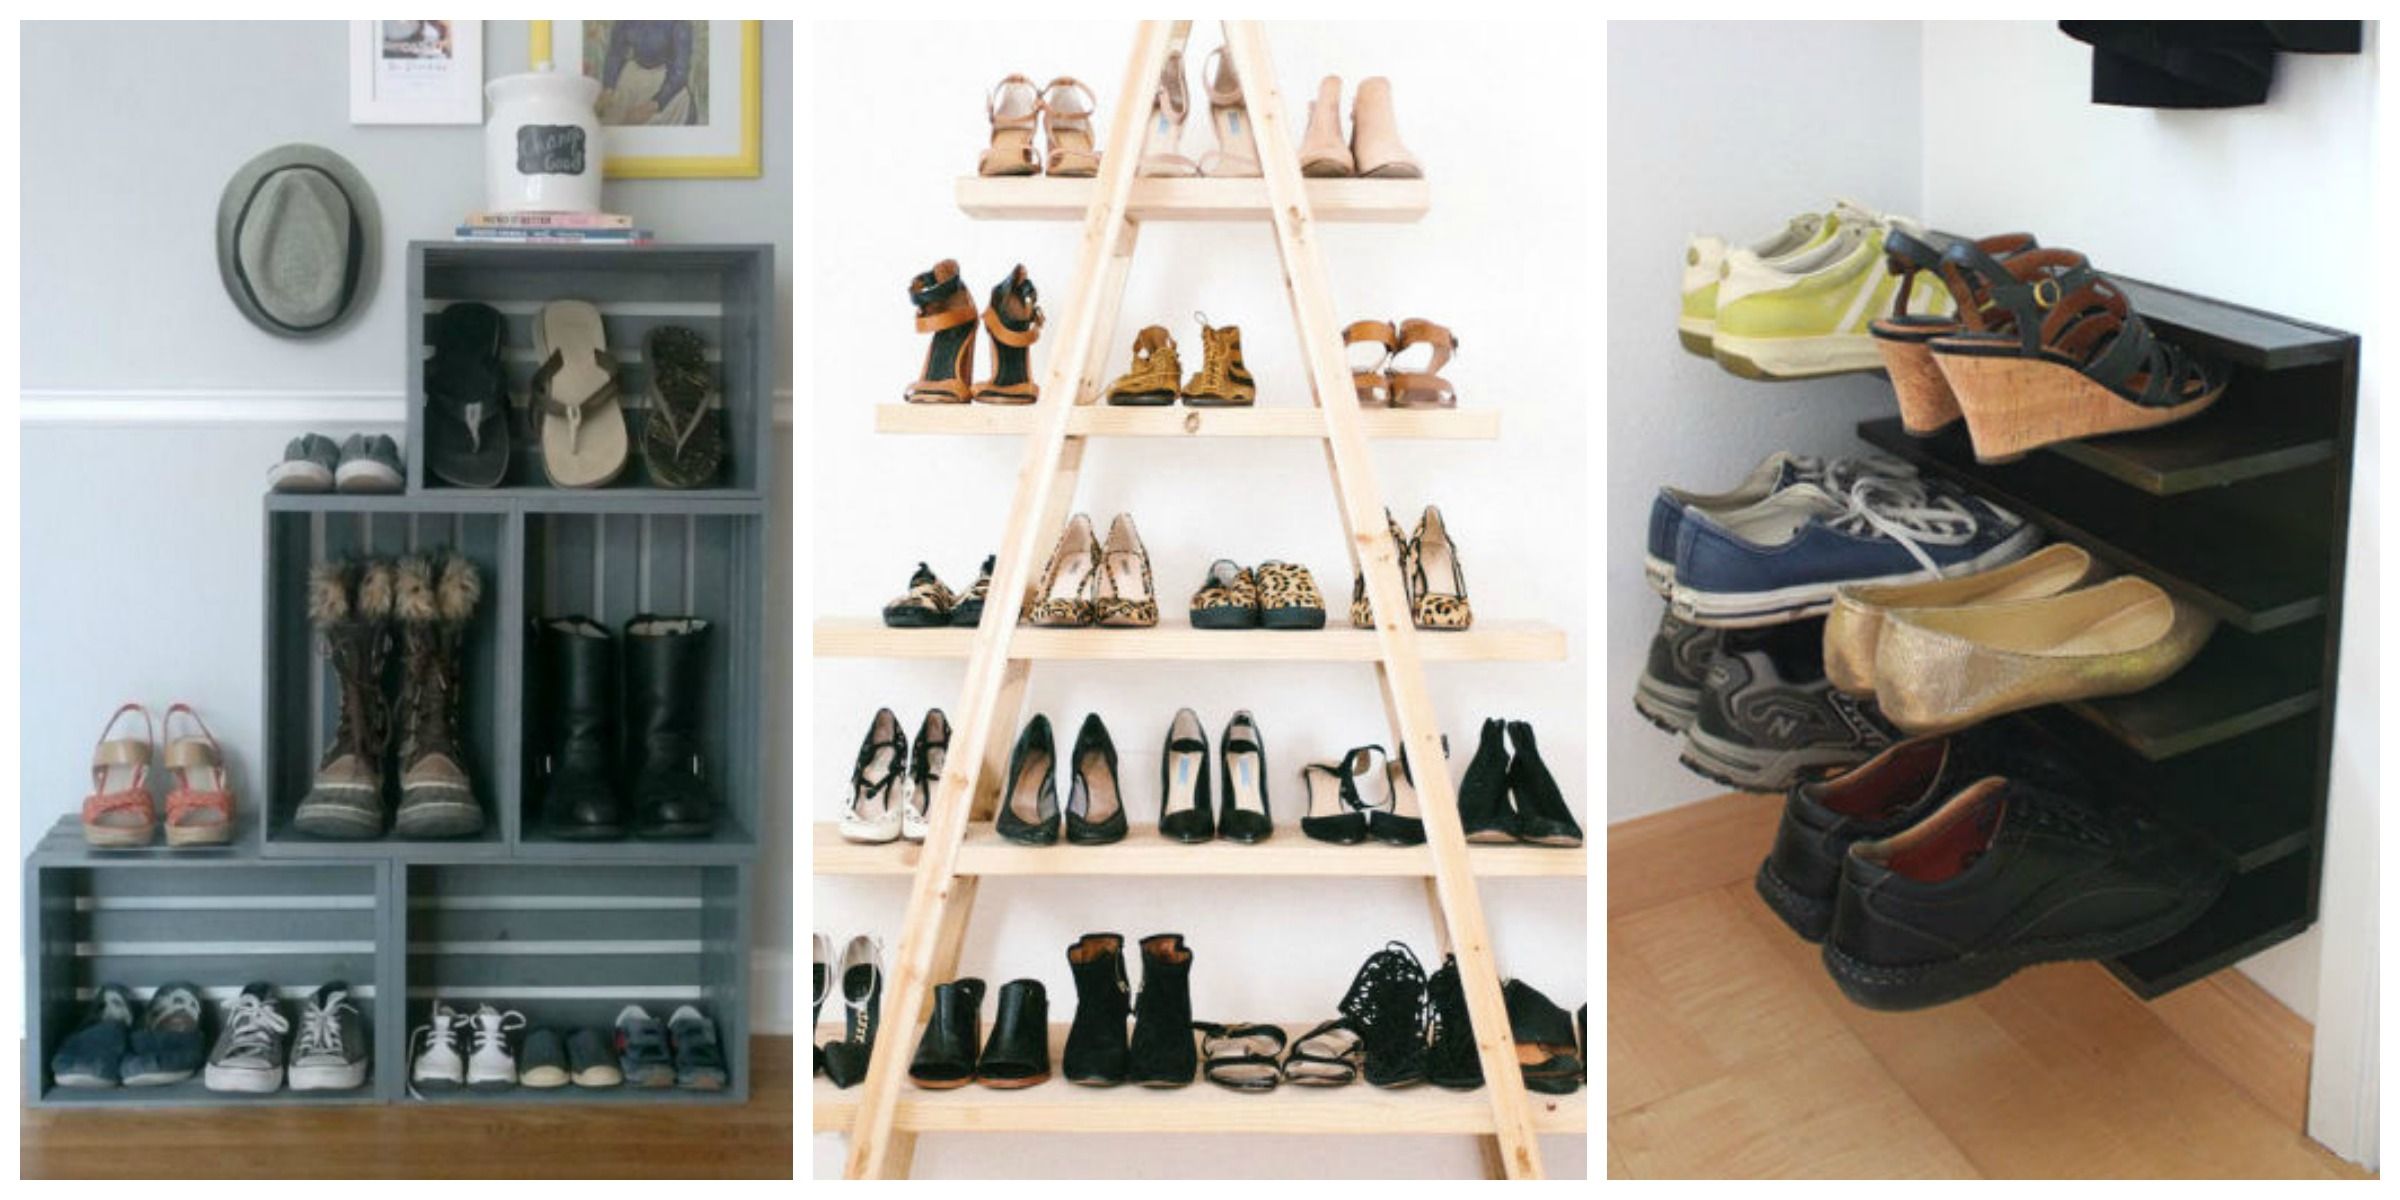 Retail Shoe Displays, Shoe Stands and Shelves